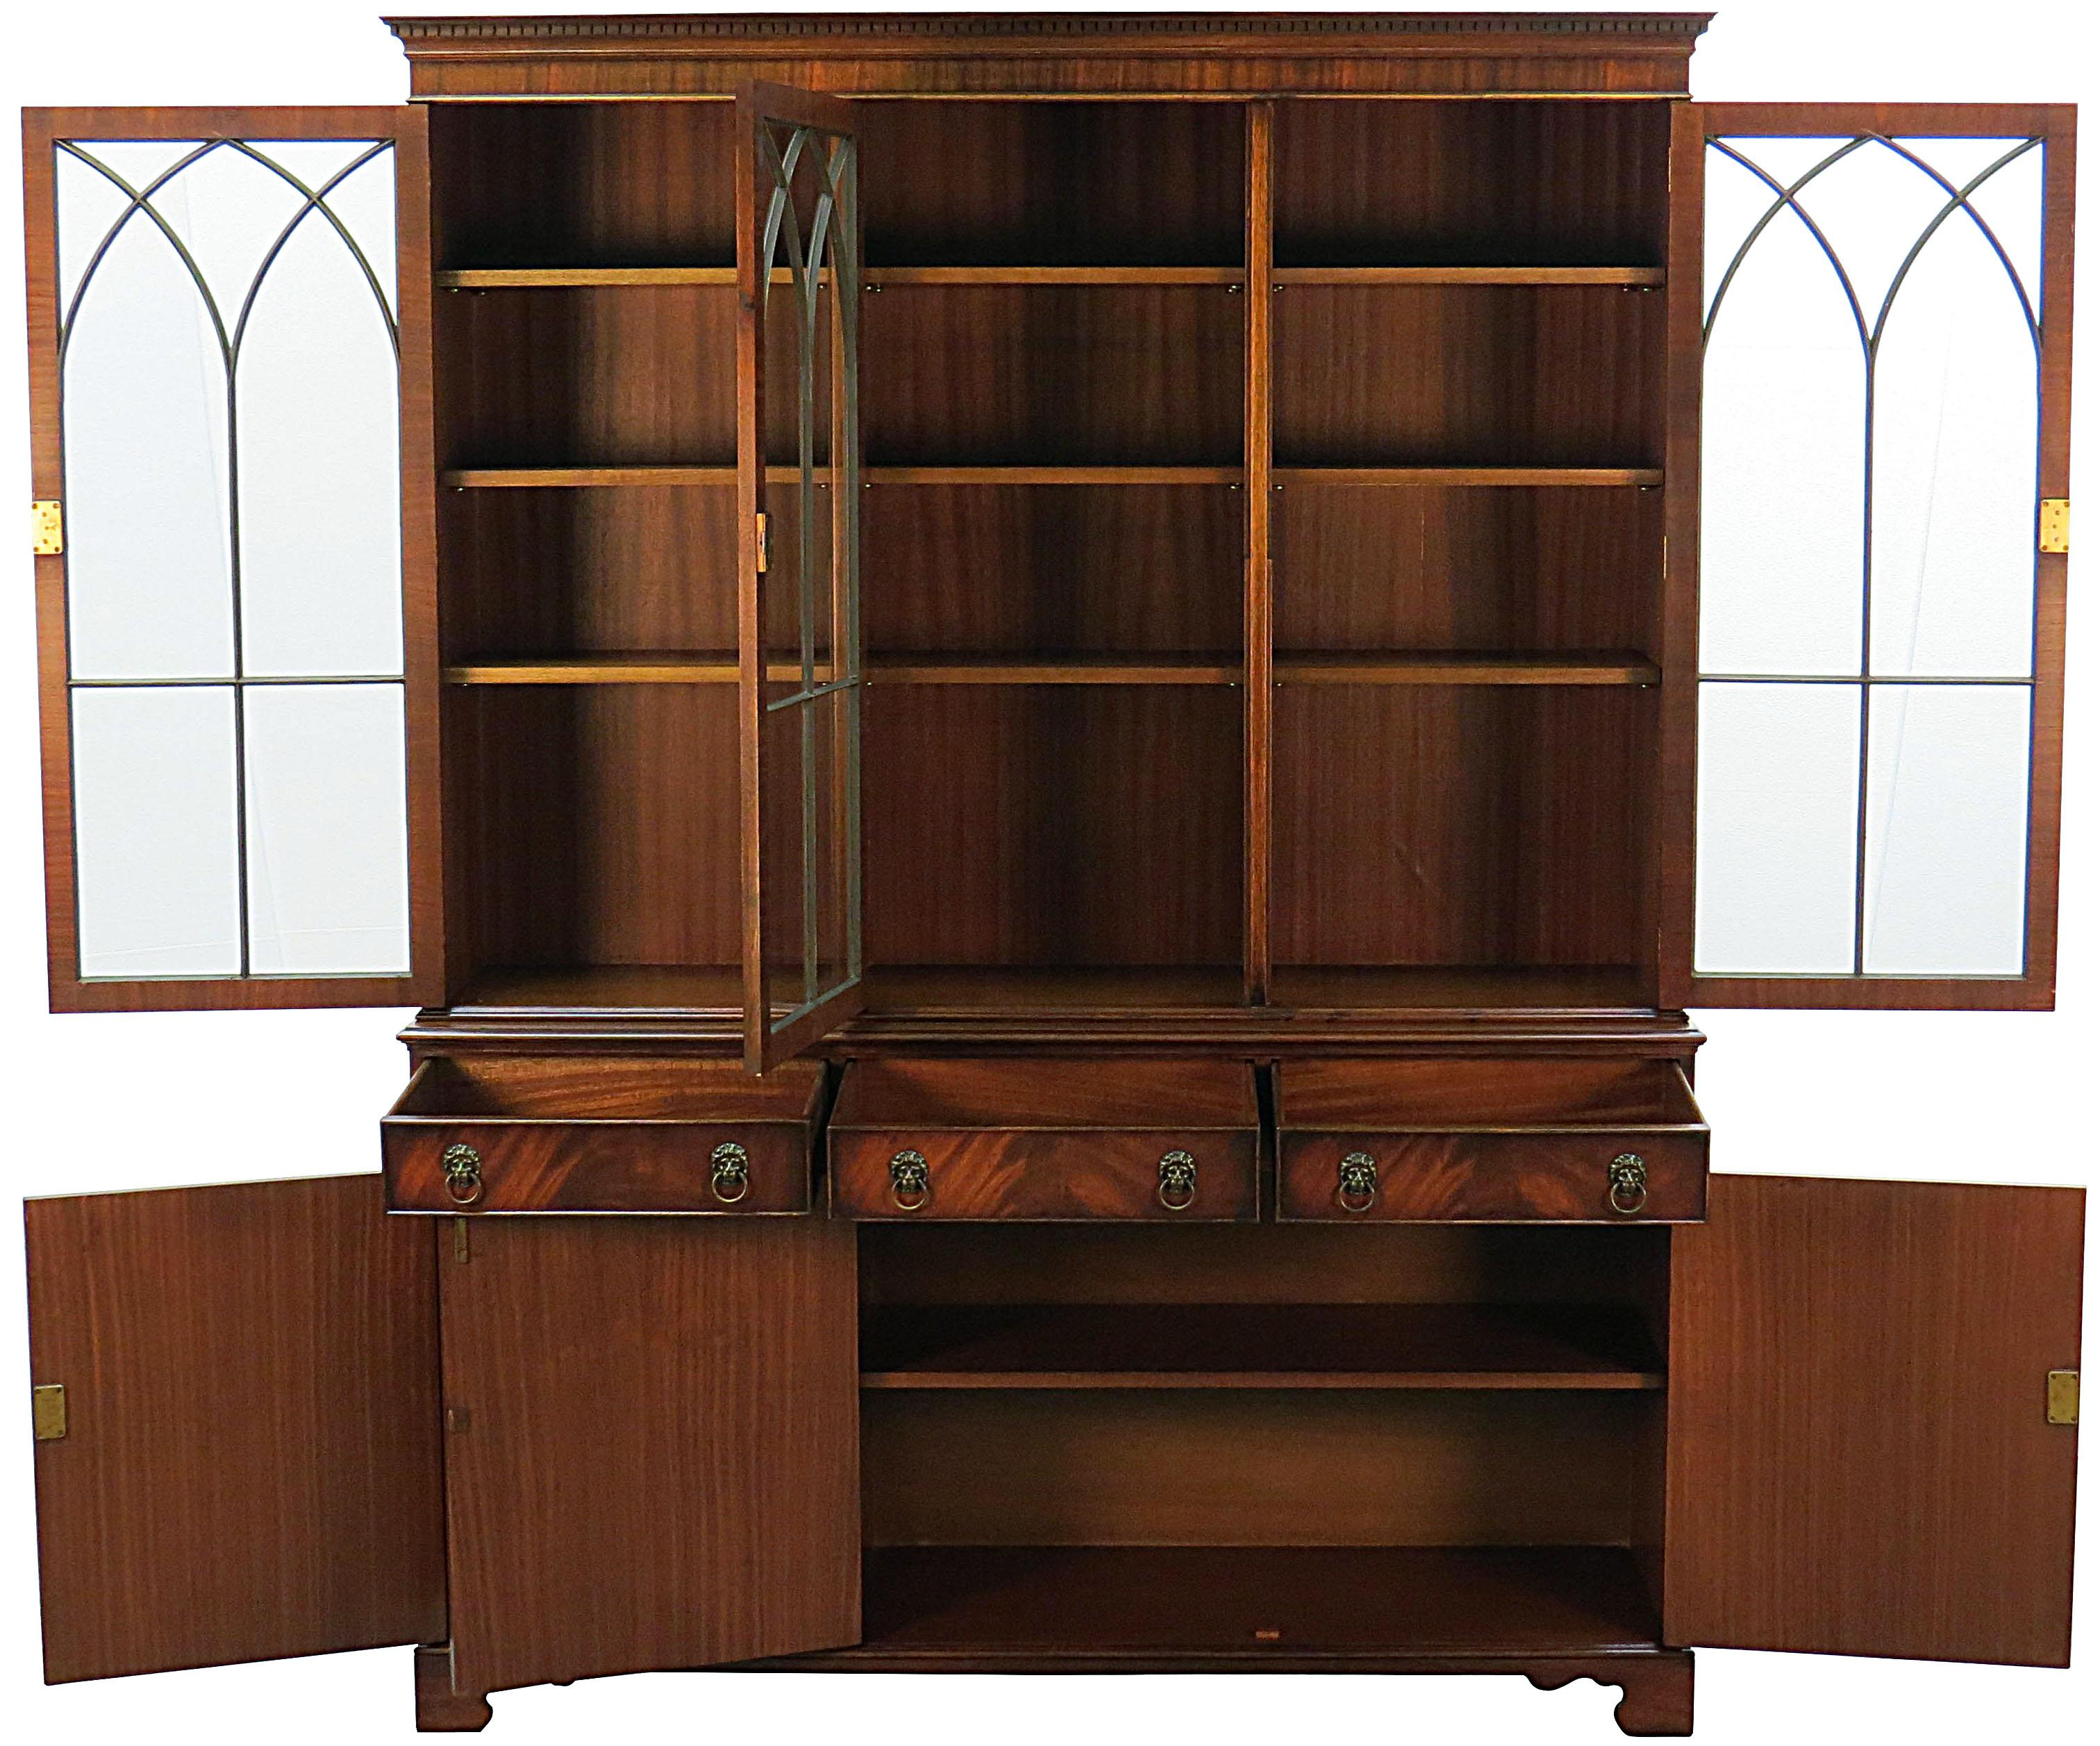 A timeless and elegant look, this Gothic style bookcase uses arches in its construction to create stunning beauty! Crafted in England circa 1960, this piece is sure to add a unique flair to any room or office.

The wood used in its construction is